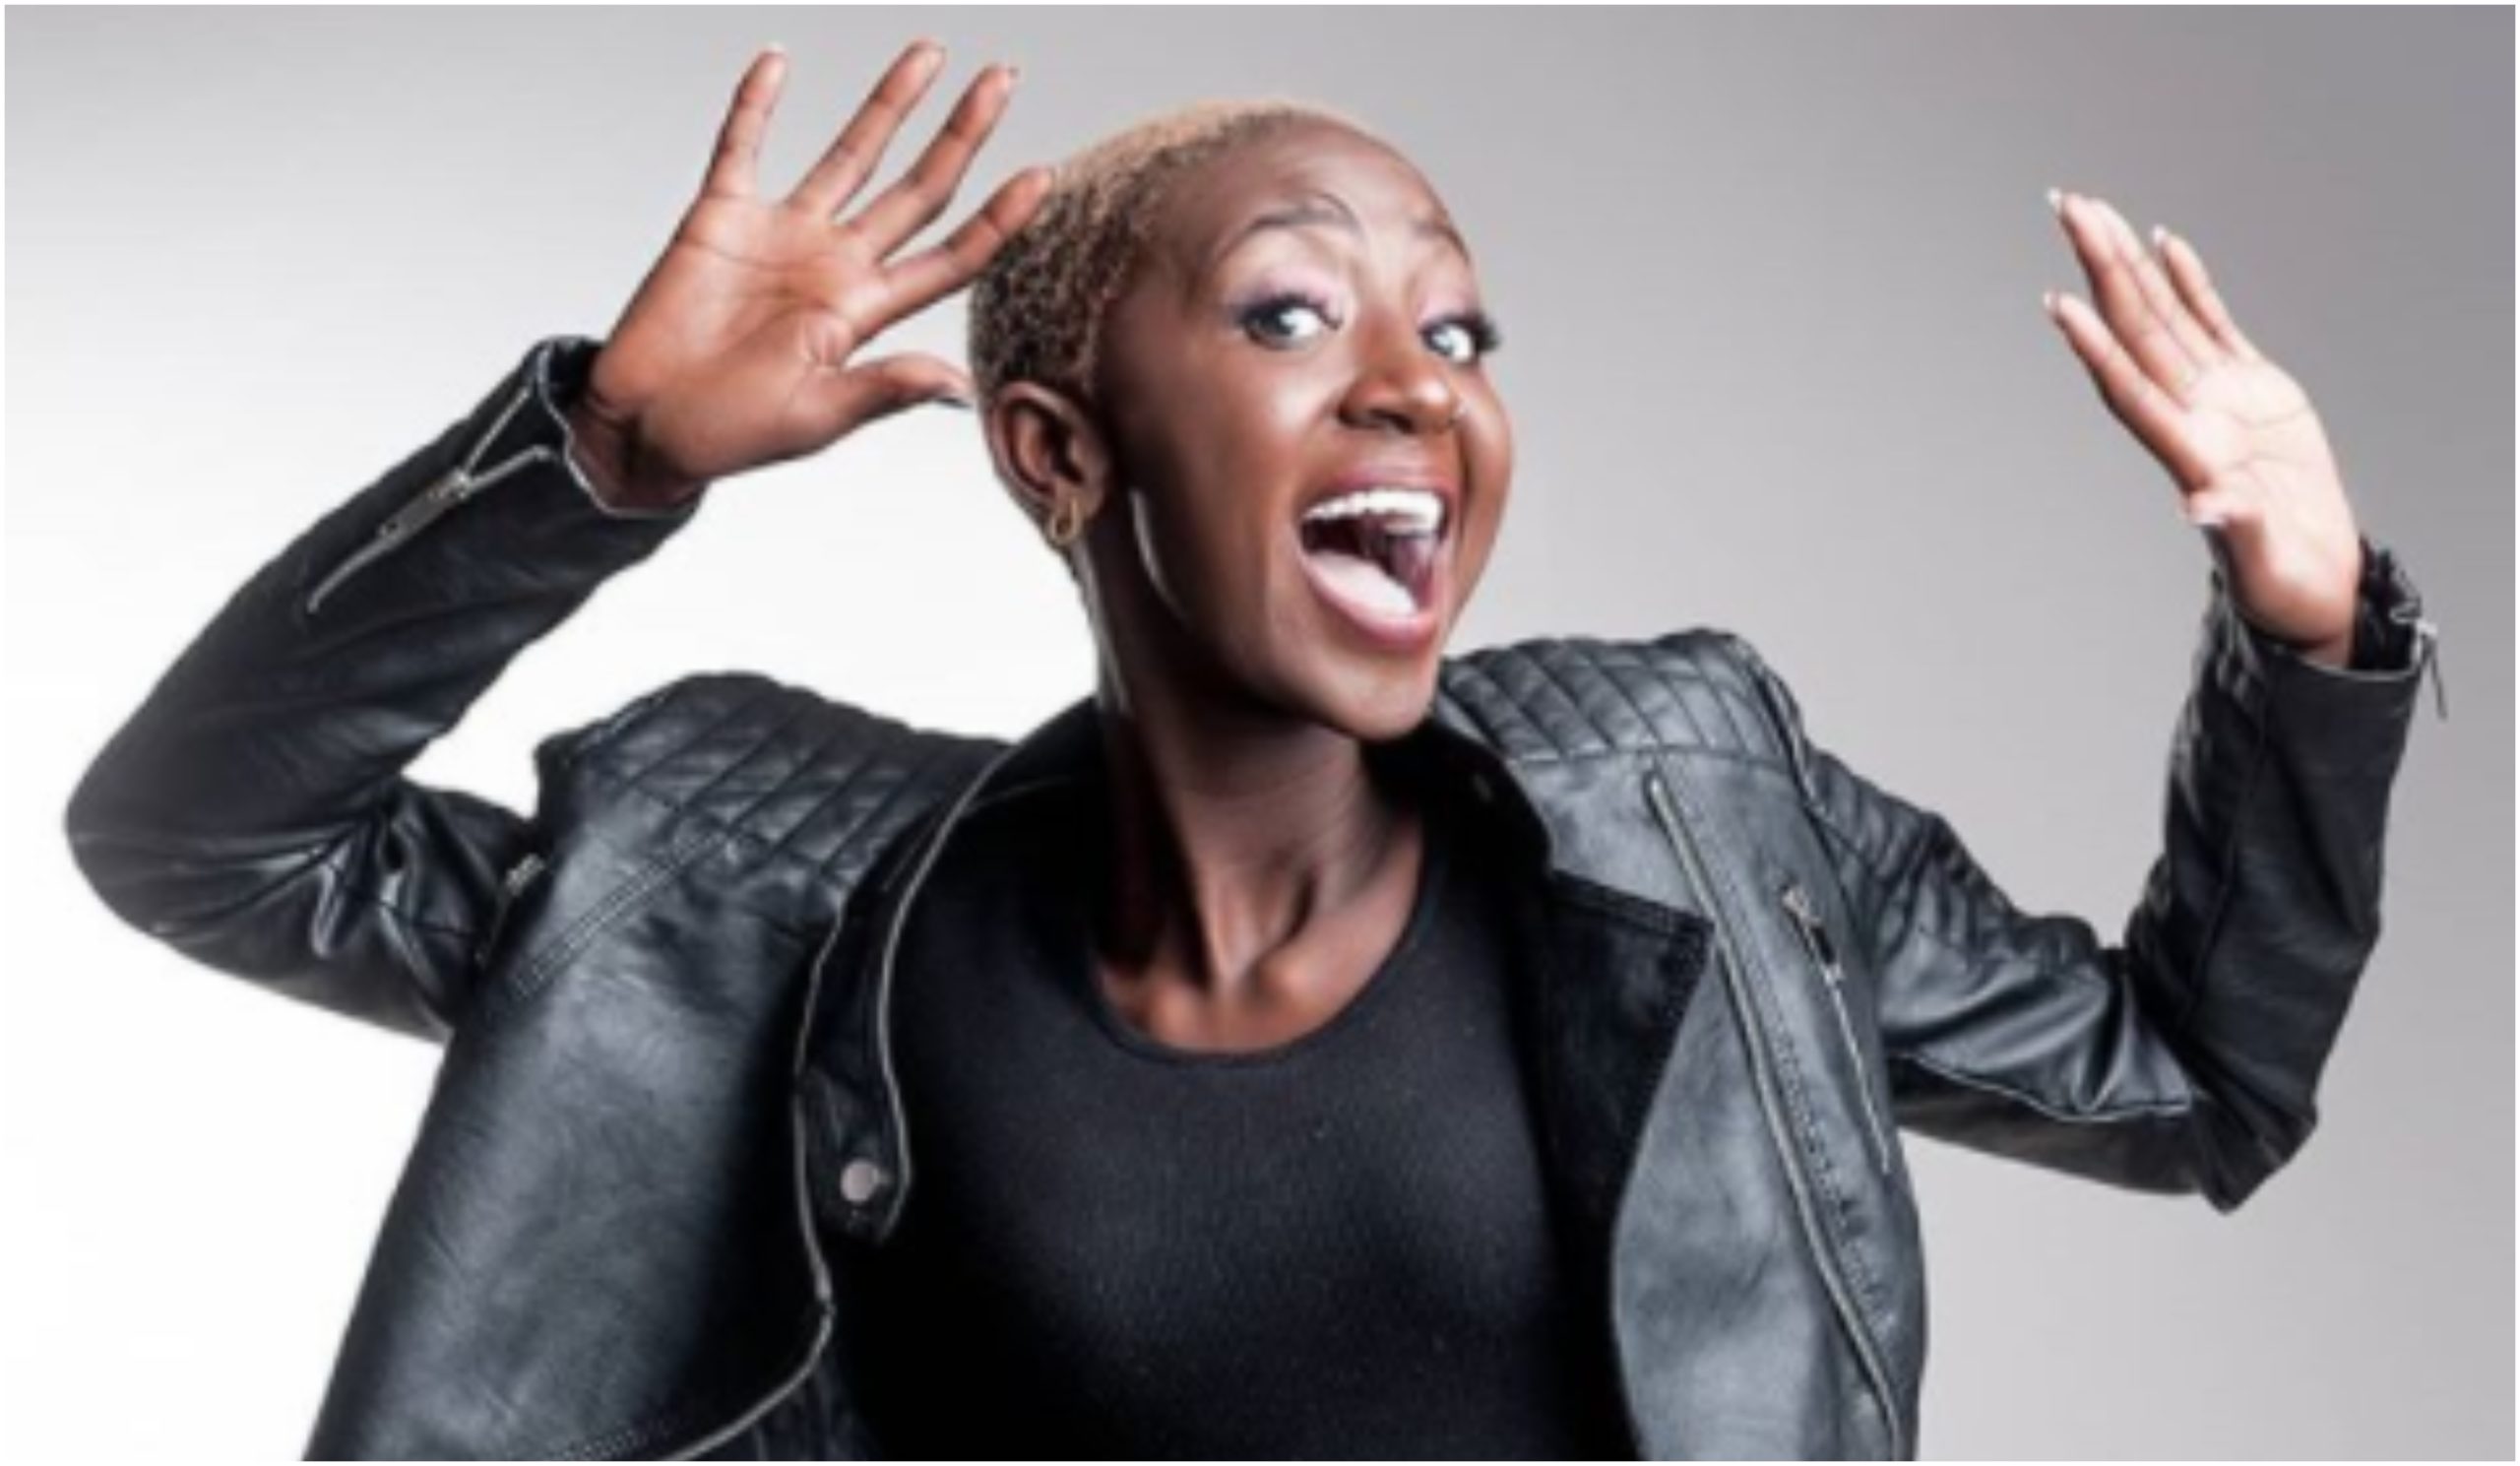 Mammito makes history! Becomes the most followed stand up comedienne in Africa